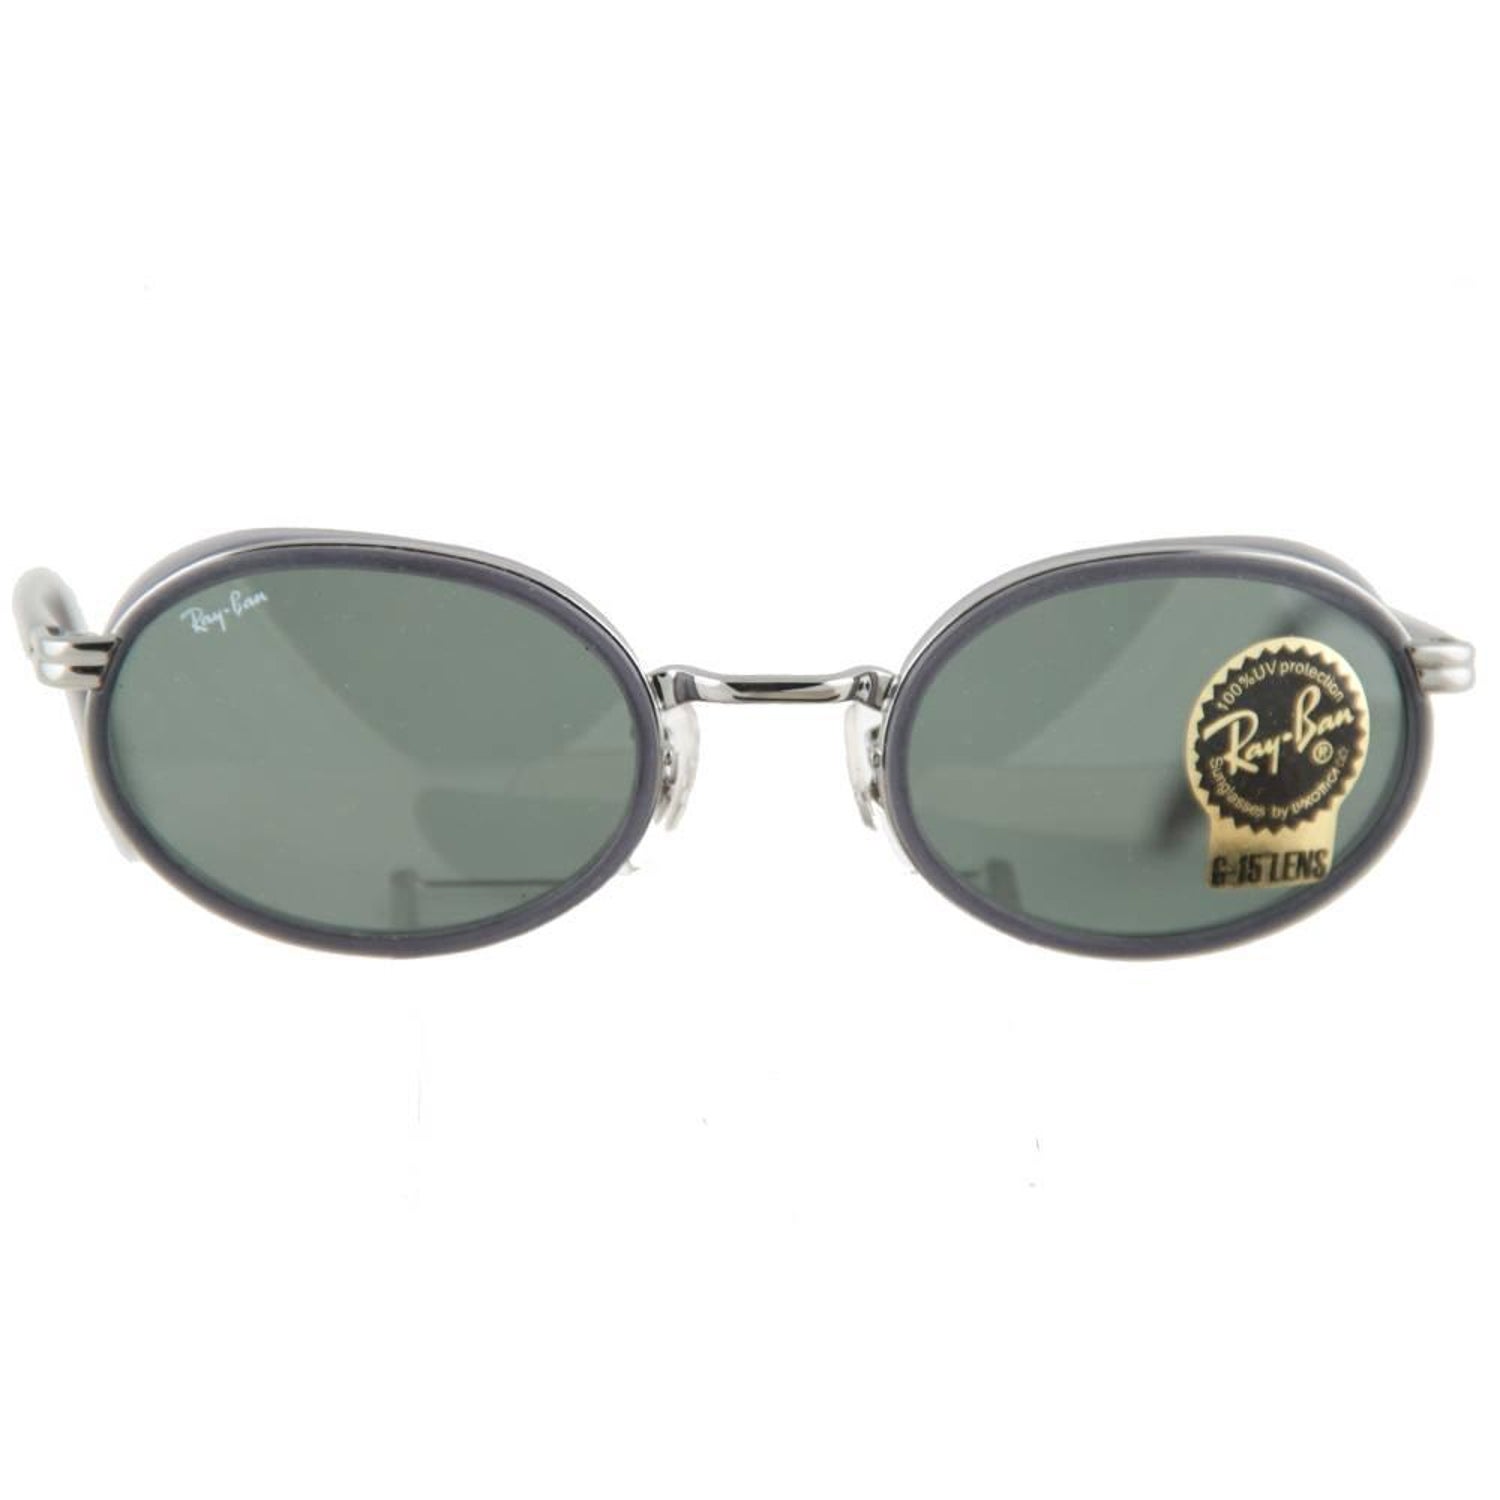 RAY-BAN B&L Vintage GRAY MINT unisex Sunglasses RB3037 W2813 50mm SIDE  SHIELDS at 1stDibs | ray ban w2813, ray ban side shields, ray ban sunglasses  with side shields